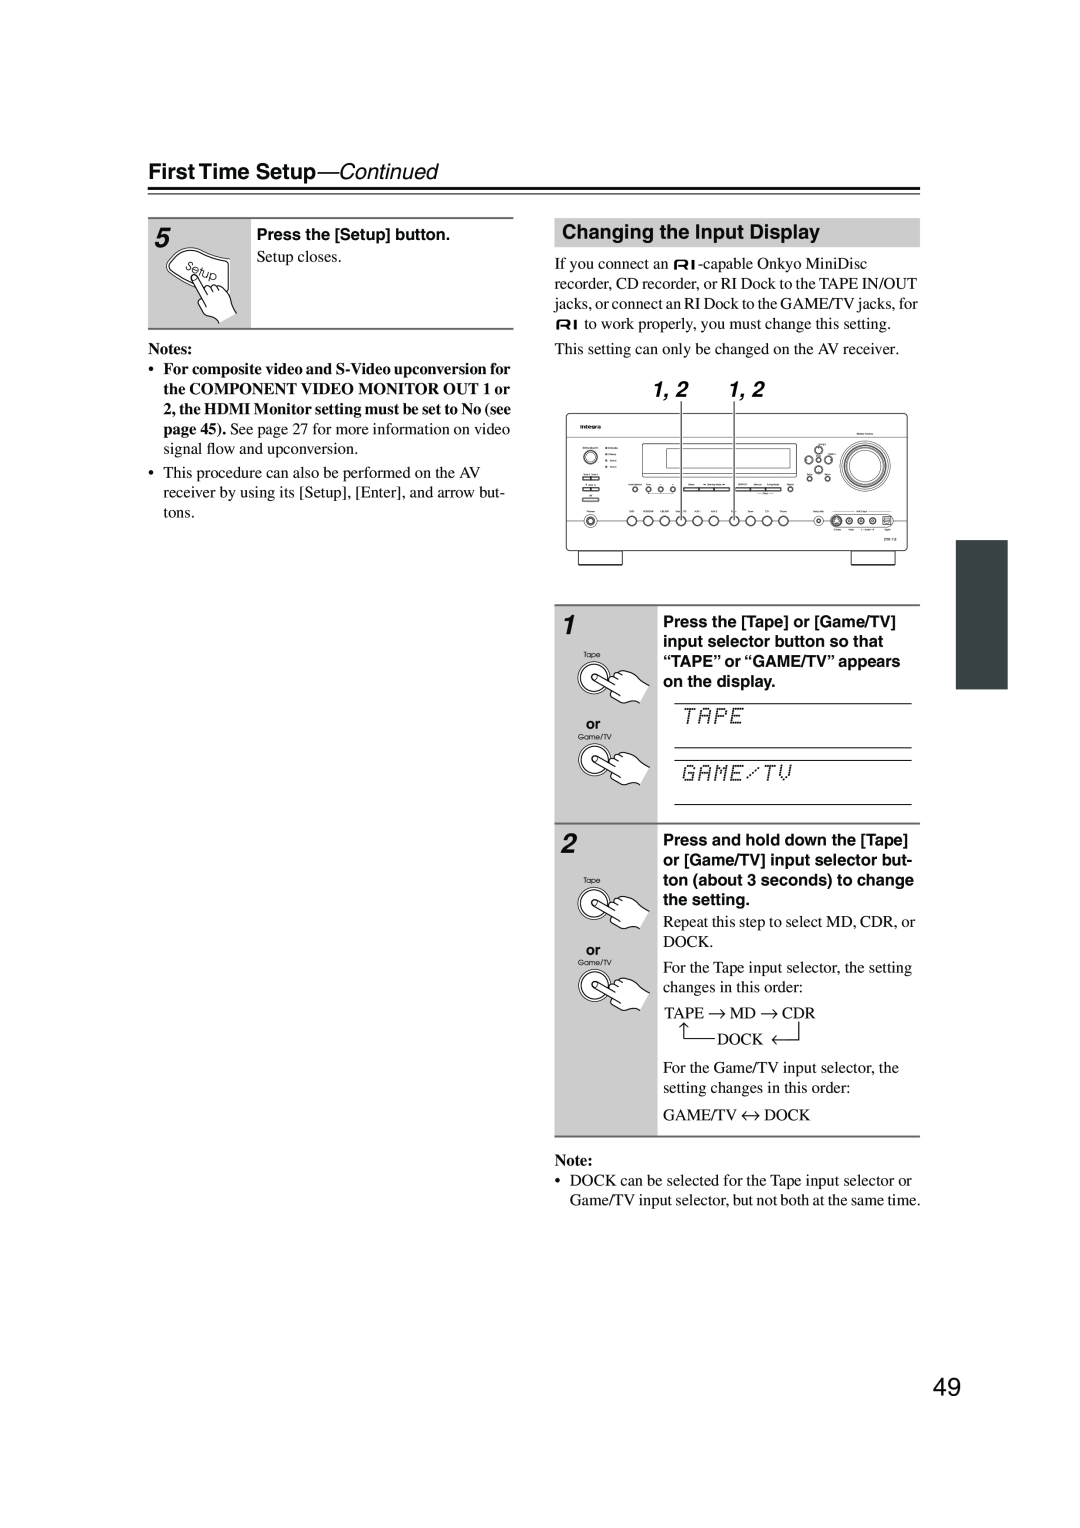 Integra DTR-7.8 instruction manual Changing the Input Display, First Time Setup—Continued, Notes 